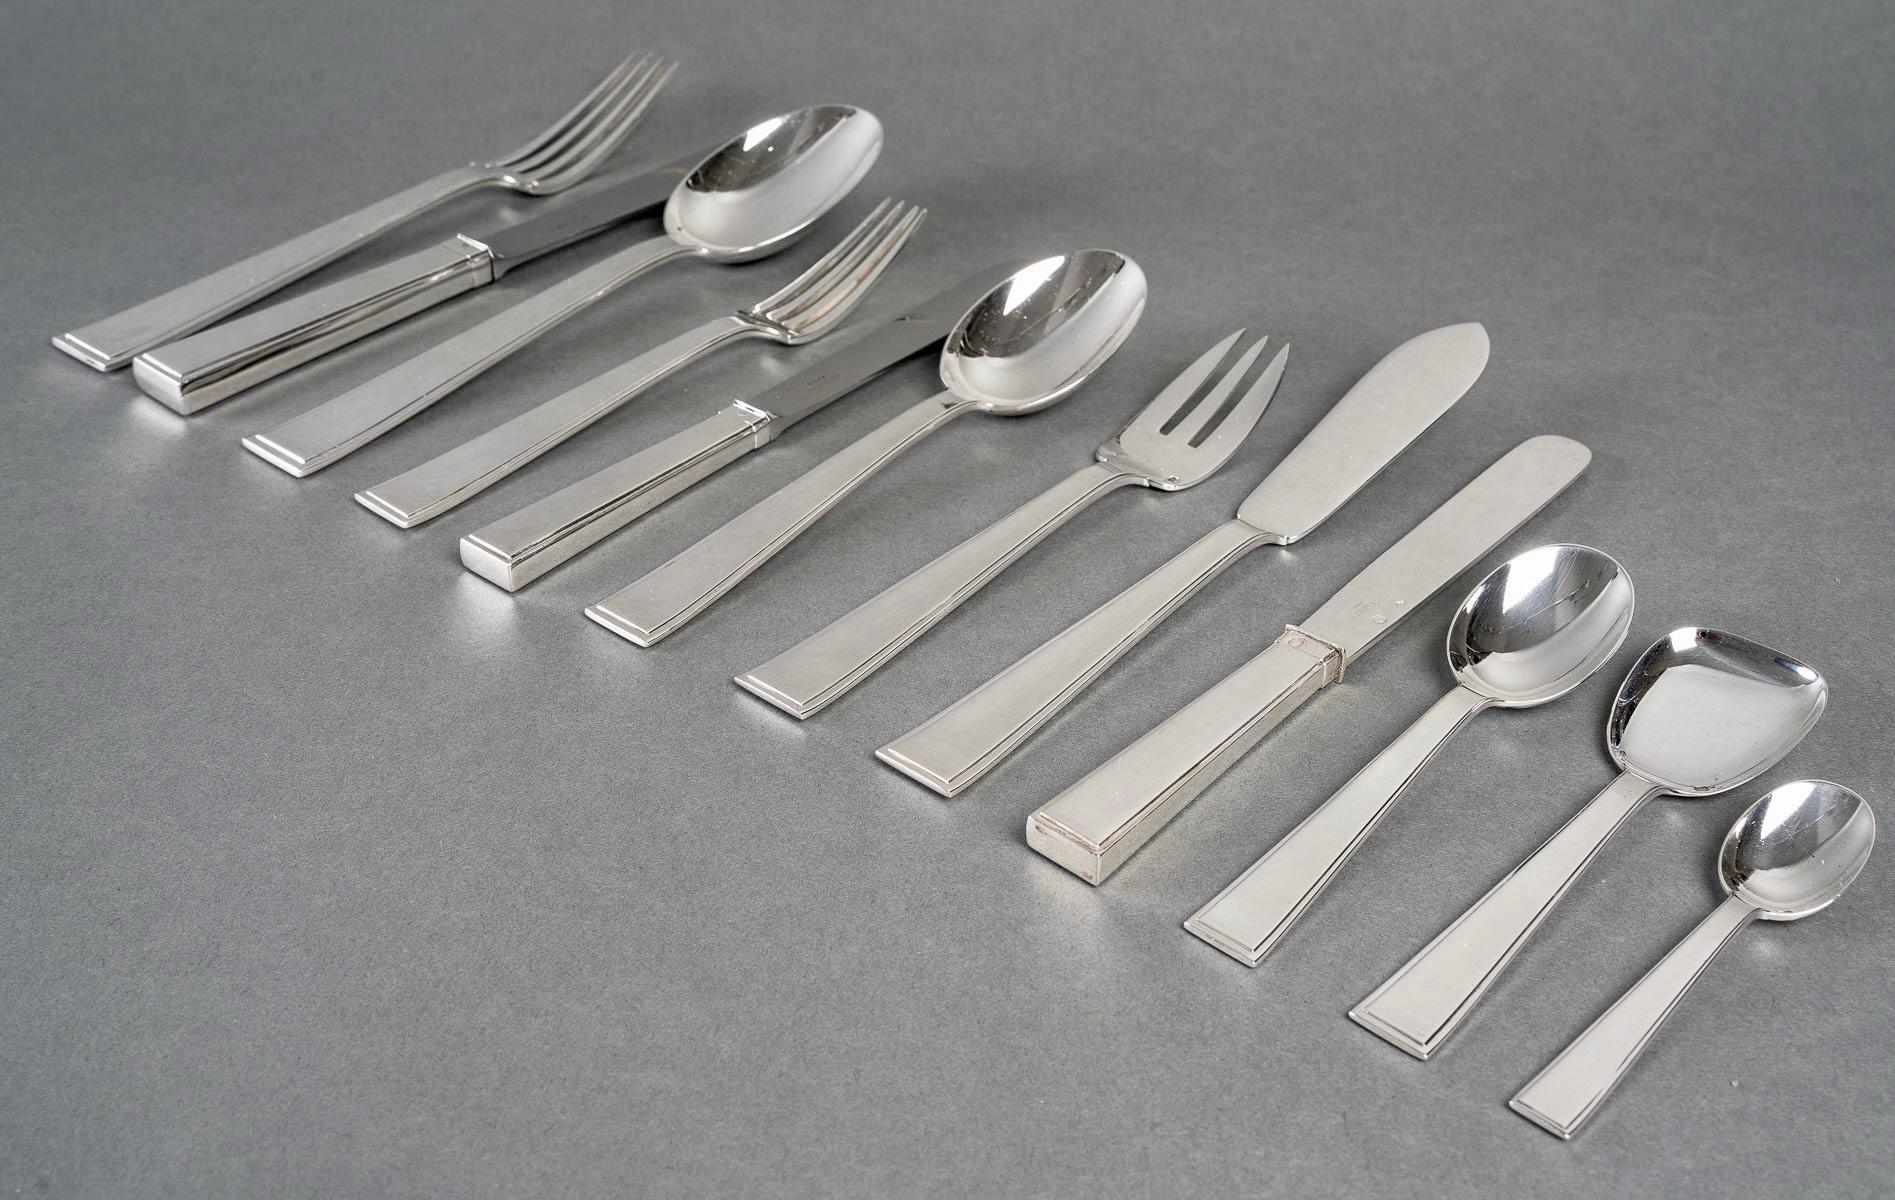 Art Deco cutlery flatware set made in 950/1000th solid sterling silver by Tetard Freres in its original wooden box. 
Designed by Valery Bizouard.

Cutlery set for 12 people including 154 pieces:
- 12 table forks
- 12 table knives
- 12 table